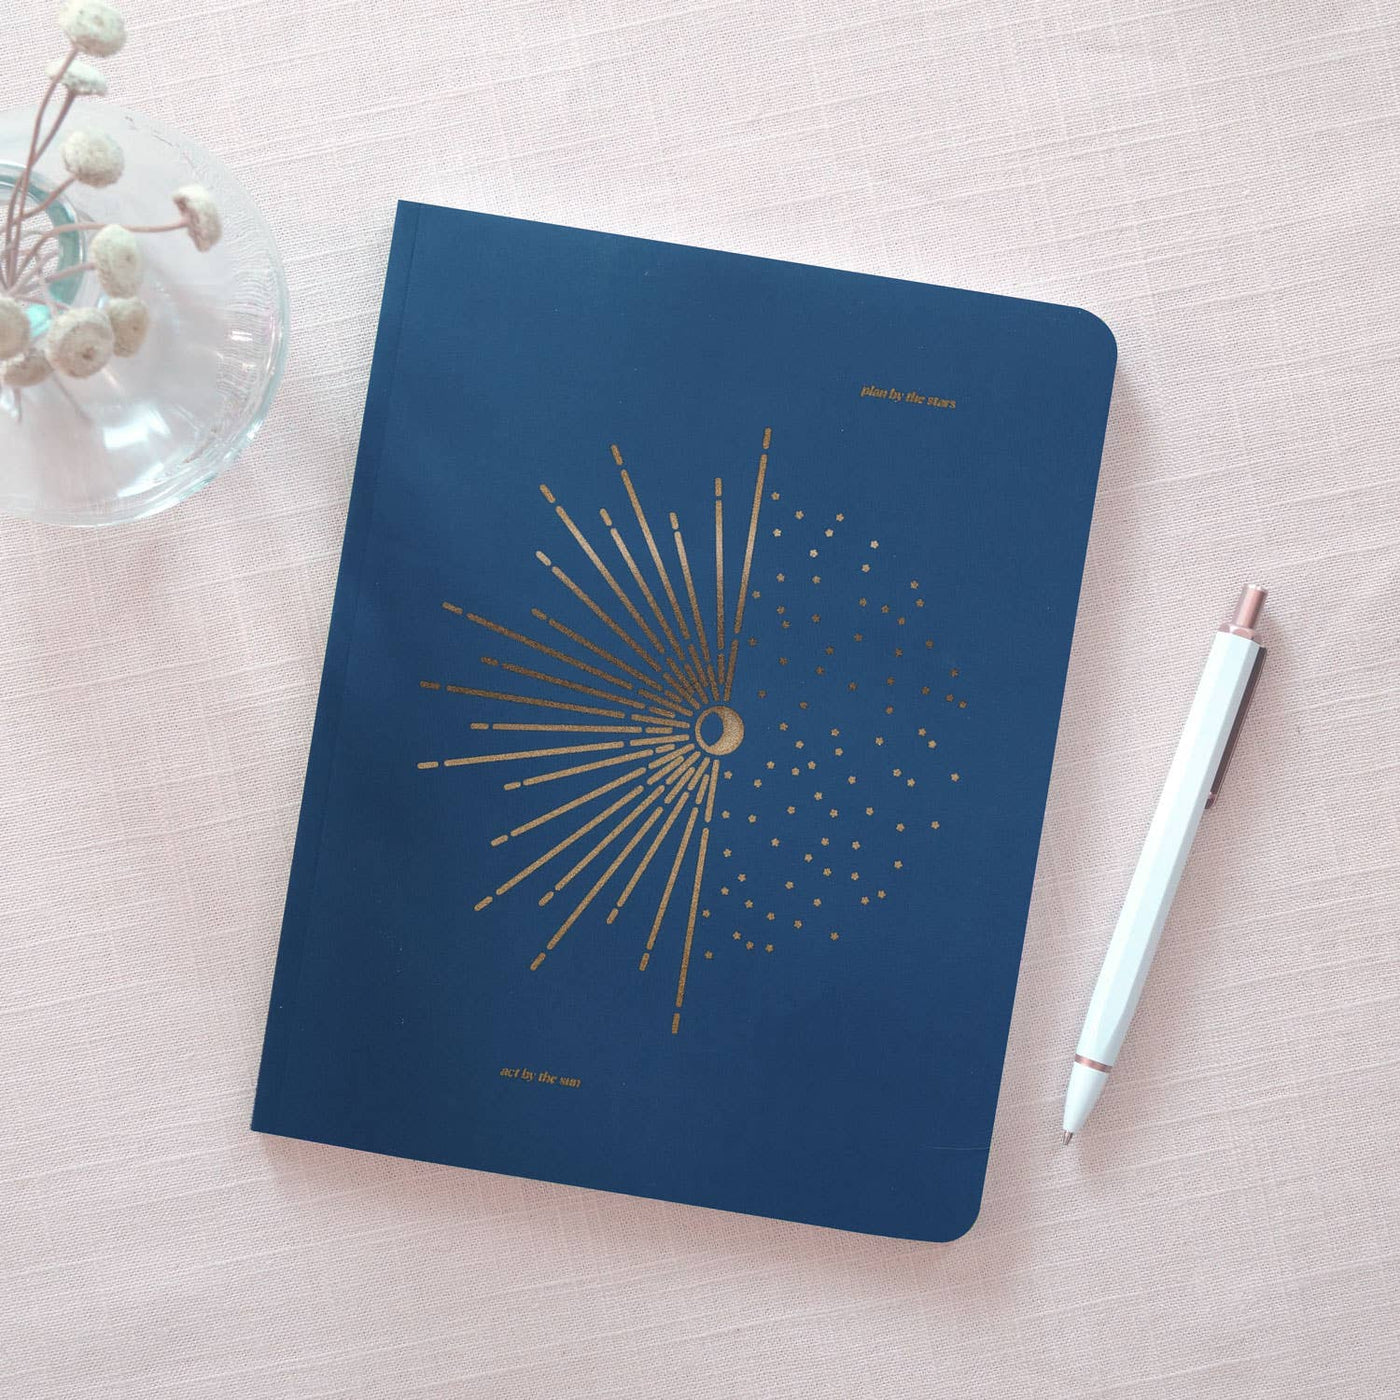 Plan by the Stars 2022 Planner